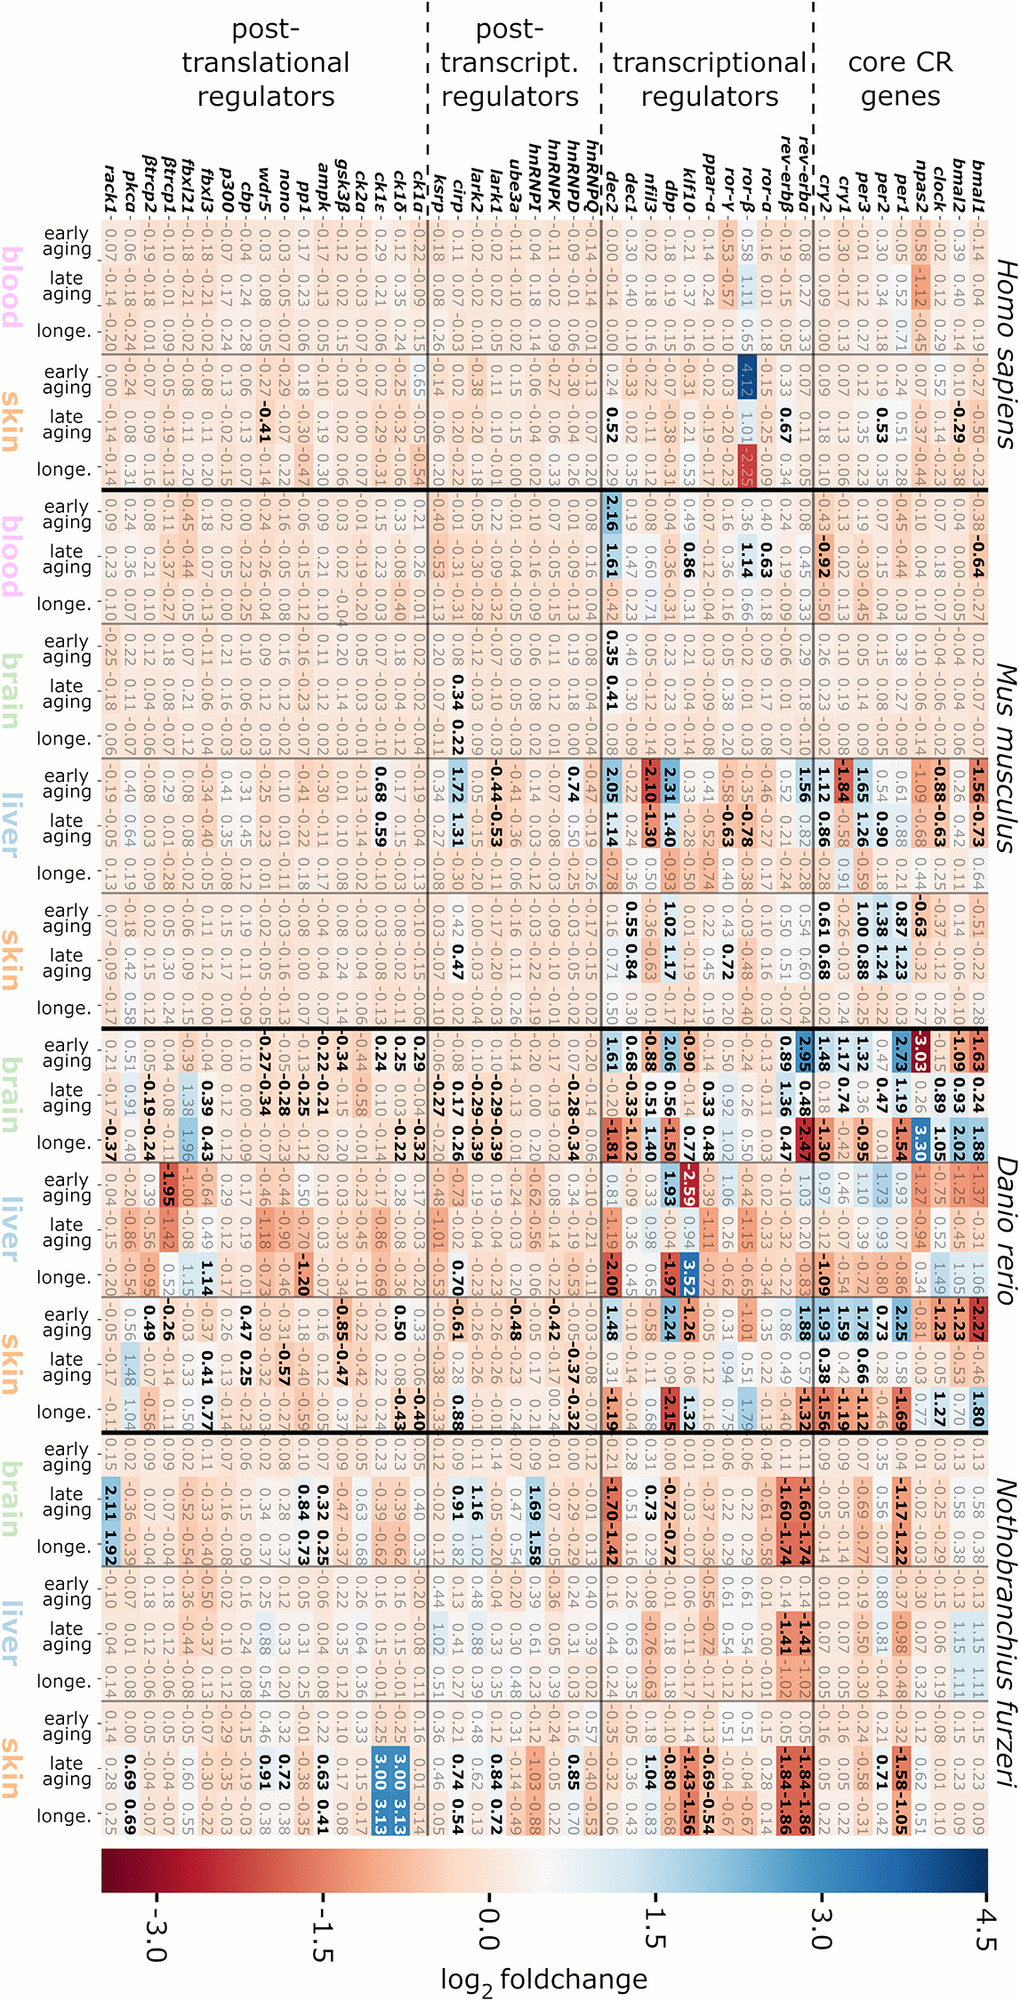 Heatmap representing log2 fold changes of the CR-related genes for the species, tissues and age categories investigated. DEG up-regulations in the course of aging are indicated by positive values displayed in blue, whereas down-regulations are shown by negative values in red. Significant gene expression alterations are highlighted in bold. The abbreviation longe. stands for the longevity age comparison (aged vs. old-age samples). For details, see the online supplement <a href="https://osf.io/9c3j4/" target="